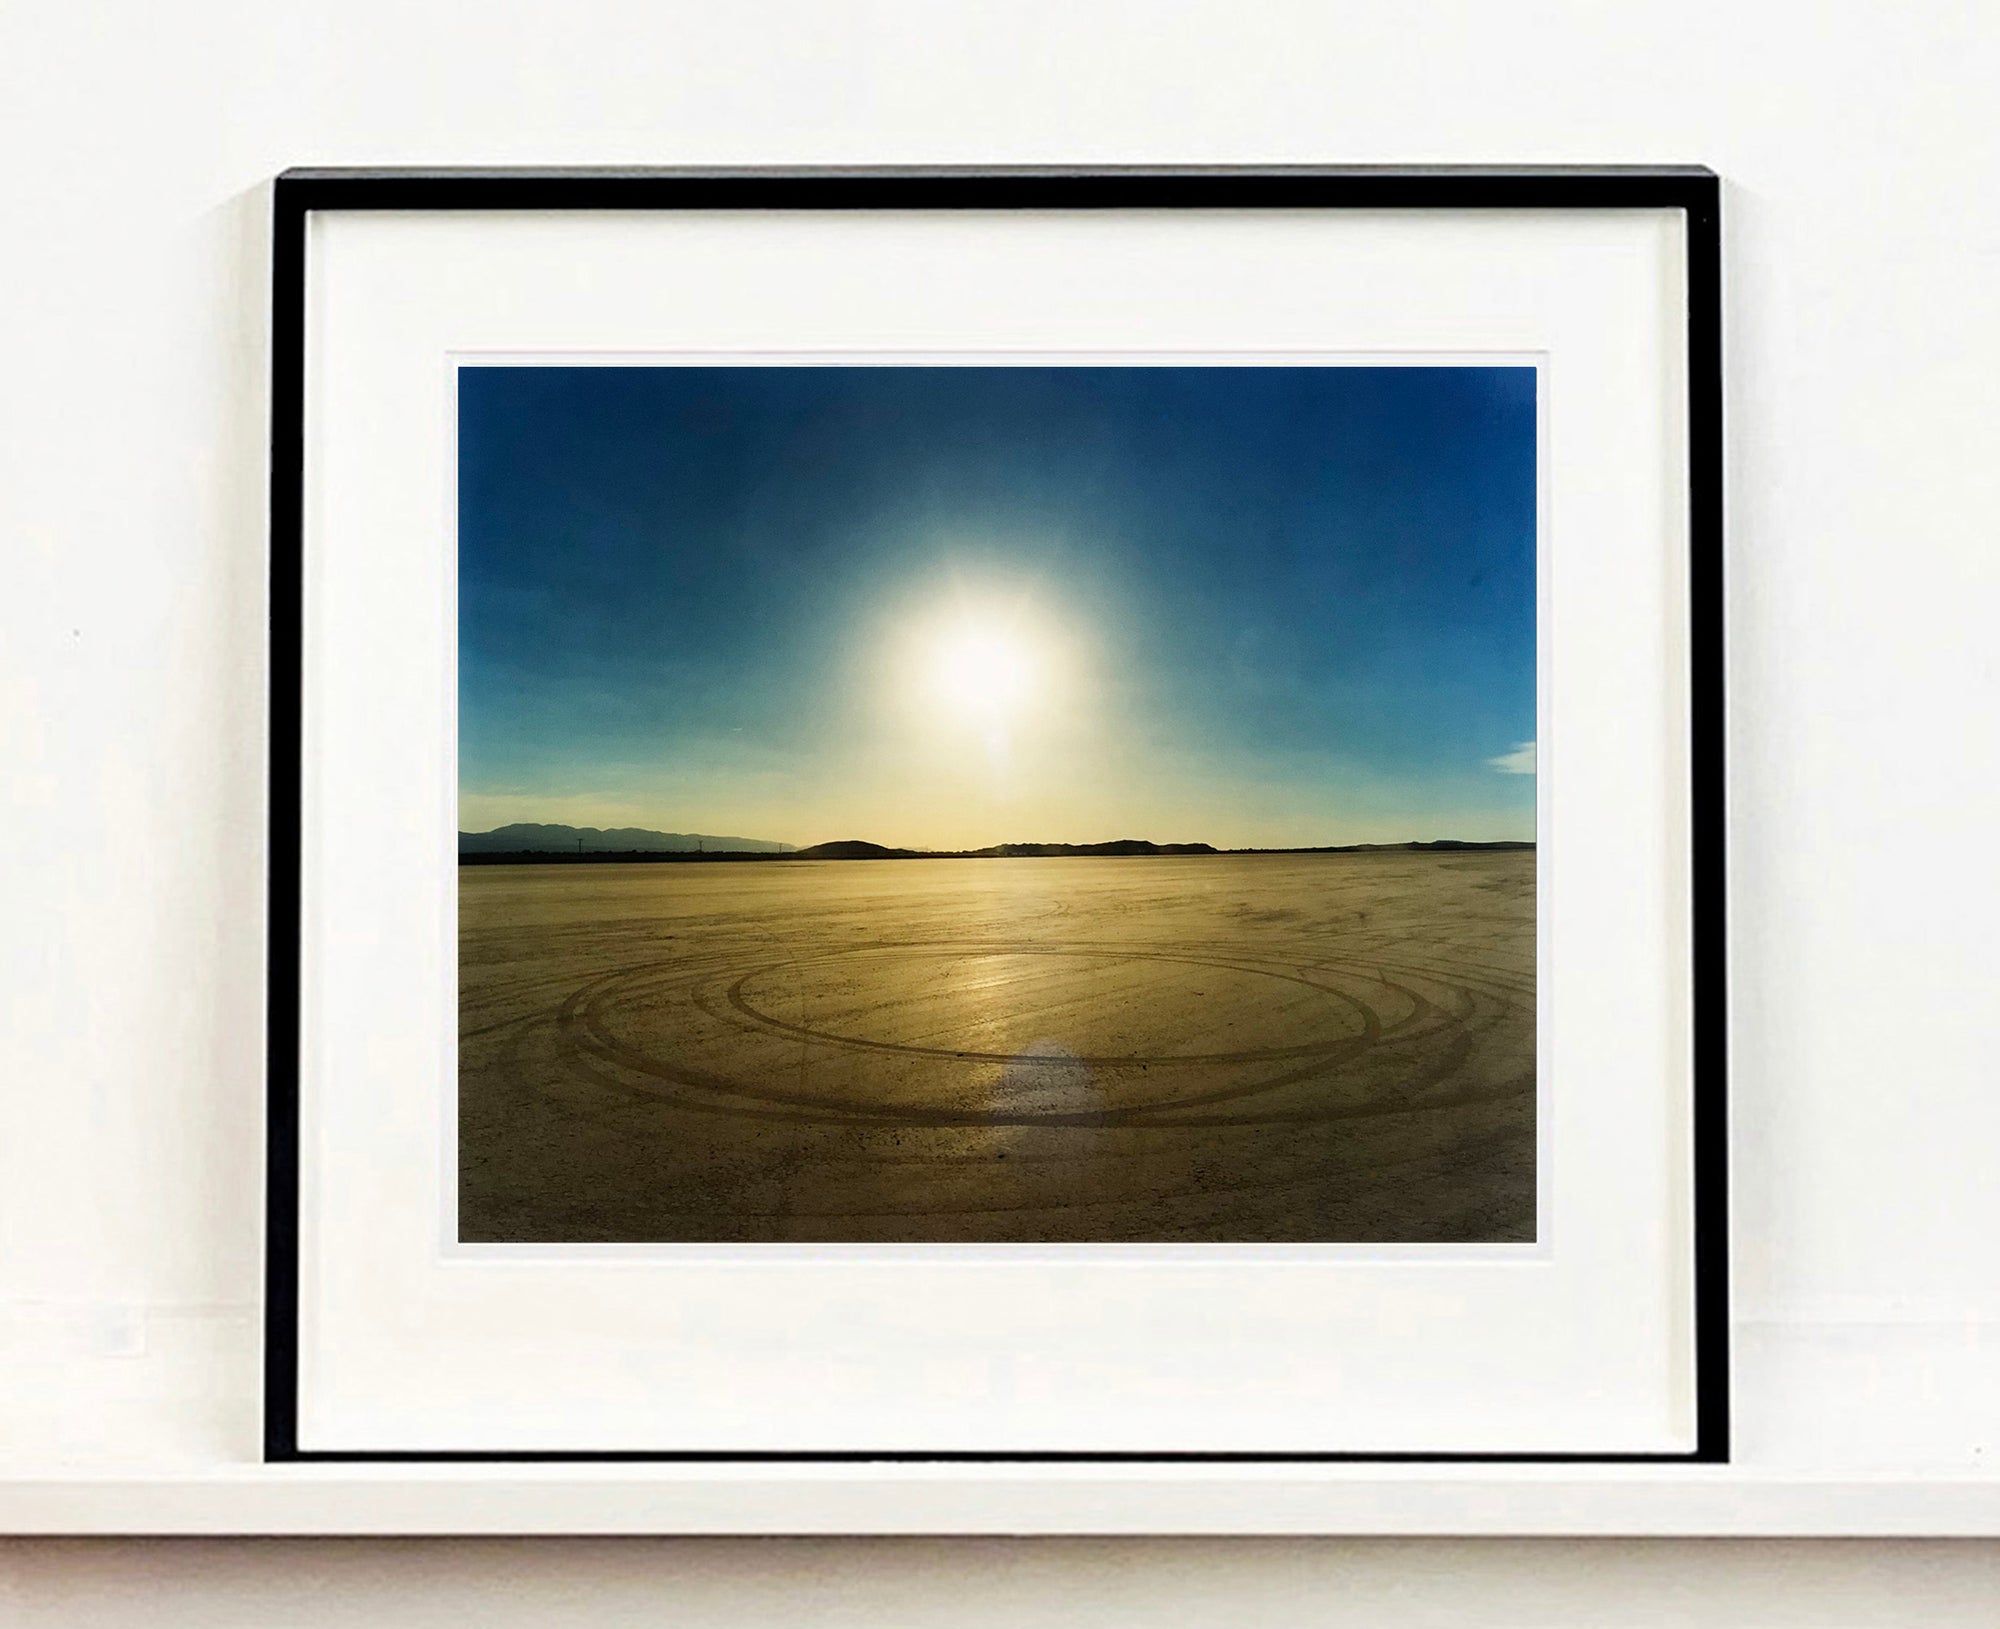 Photographed at El Mirage Lake, where the Southern Californian Timing Association, Land Speed Racing event, tracks in the ground from the previous days racing, adding a beauty to the natural landscape.